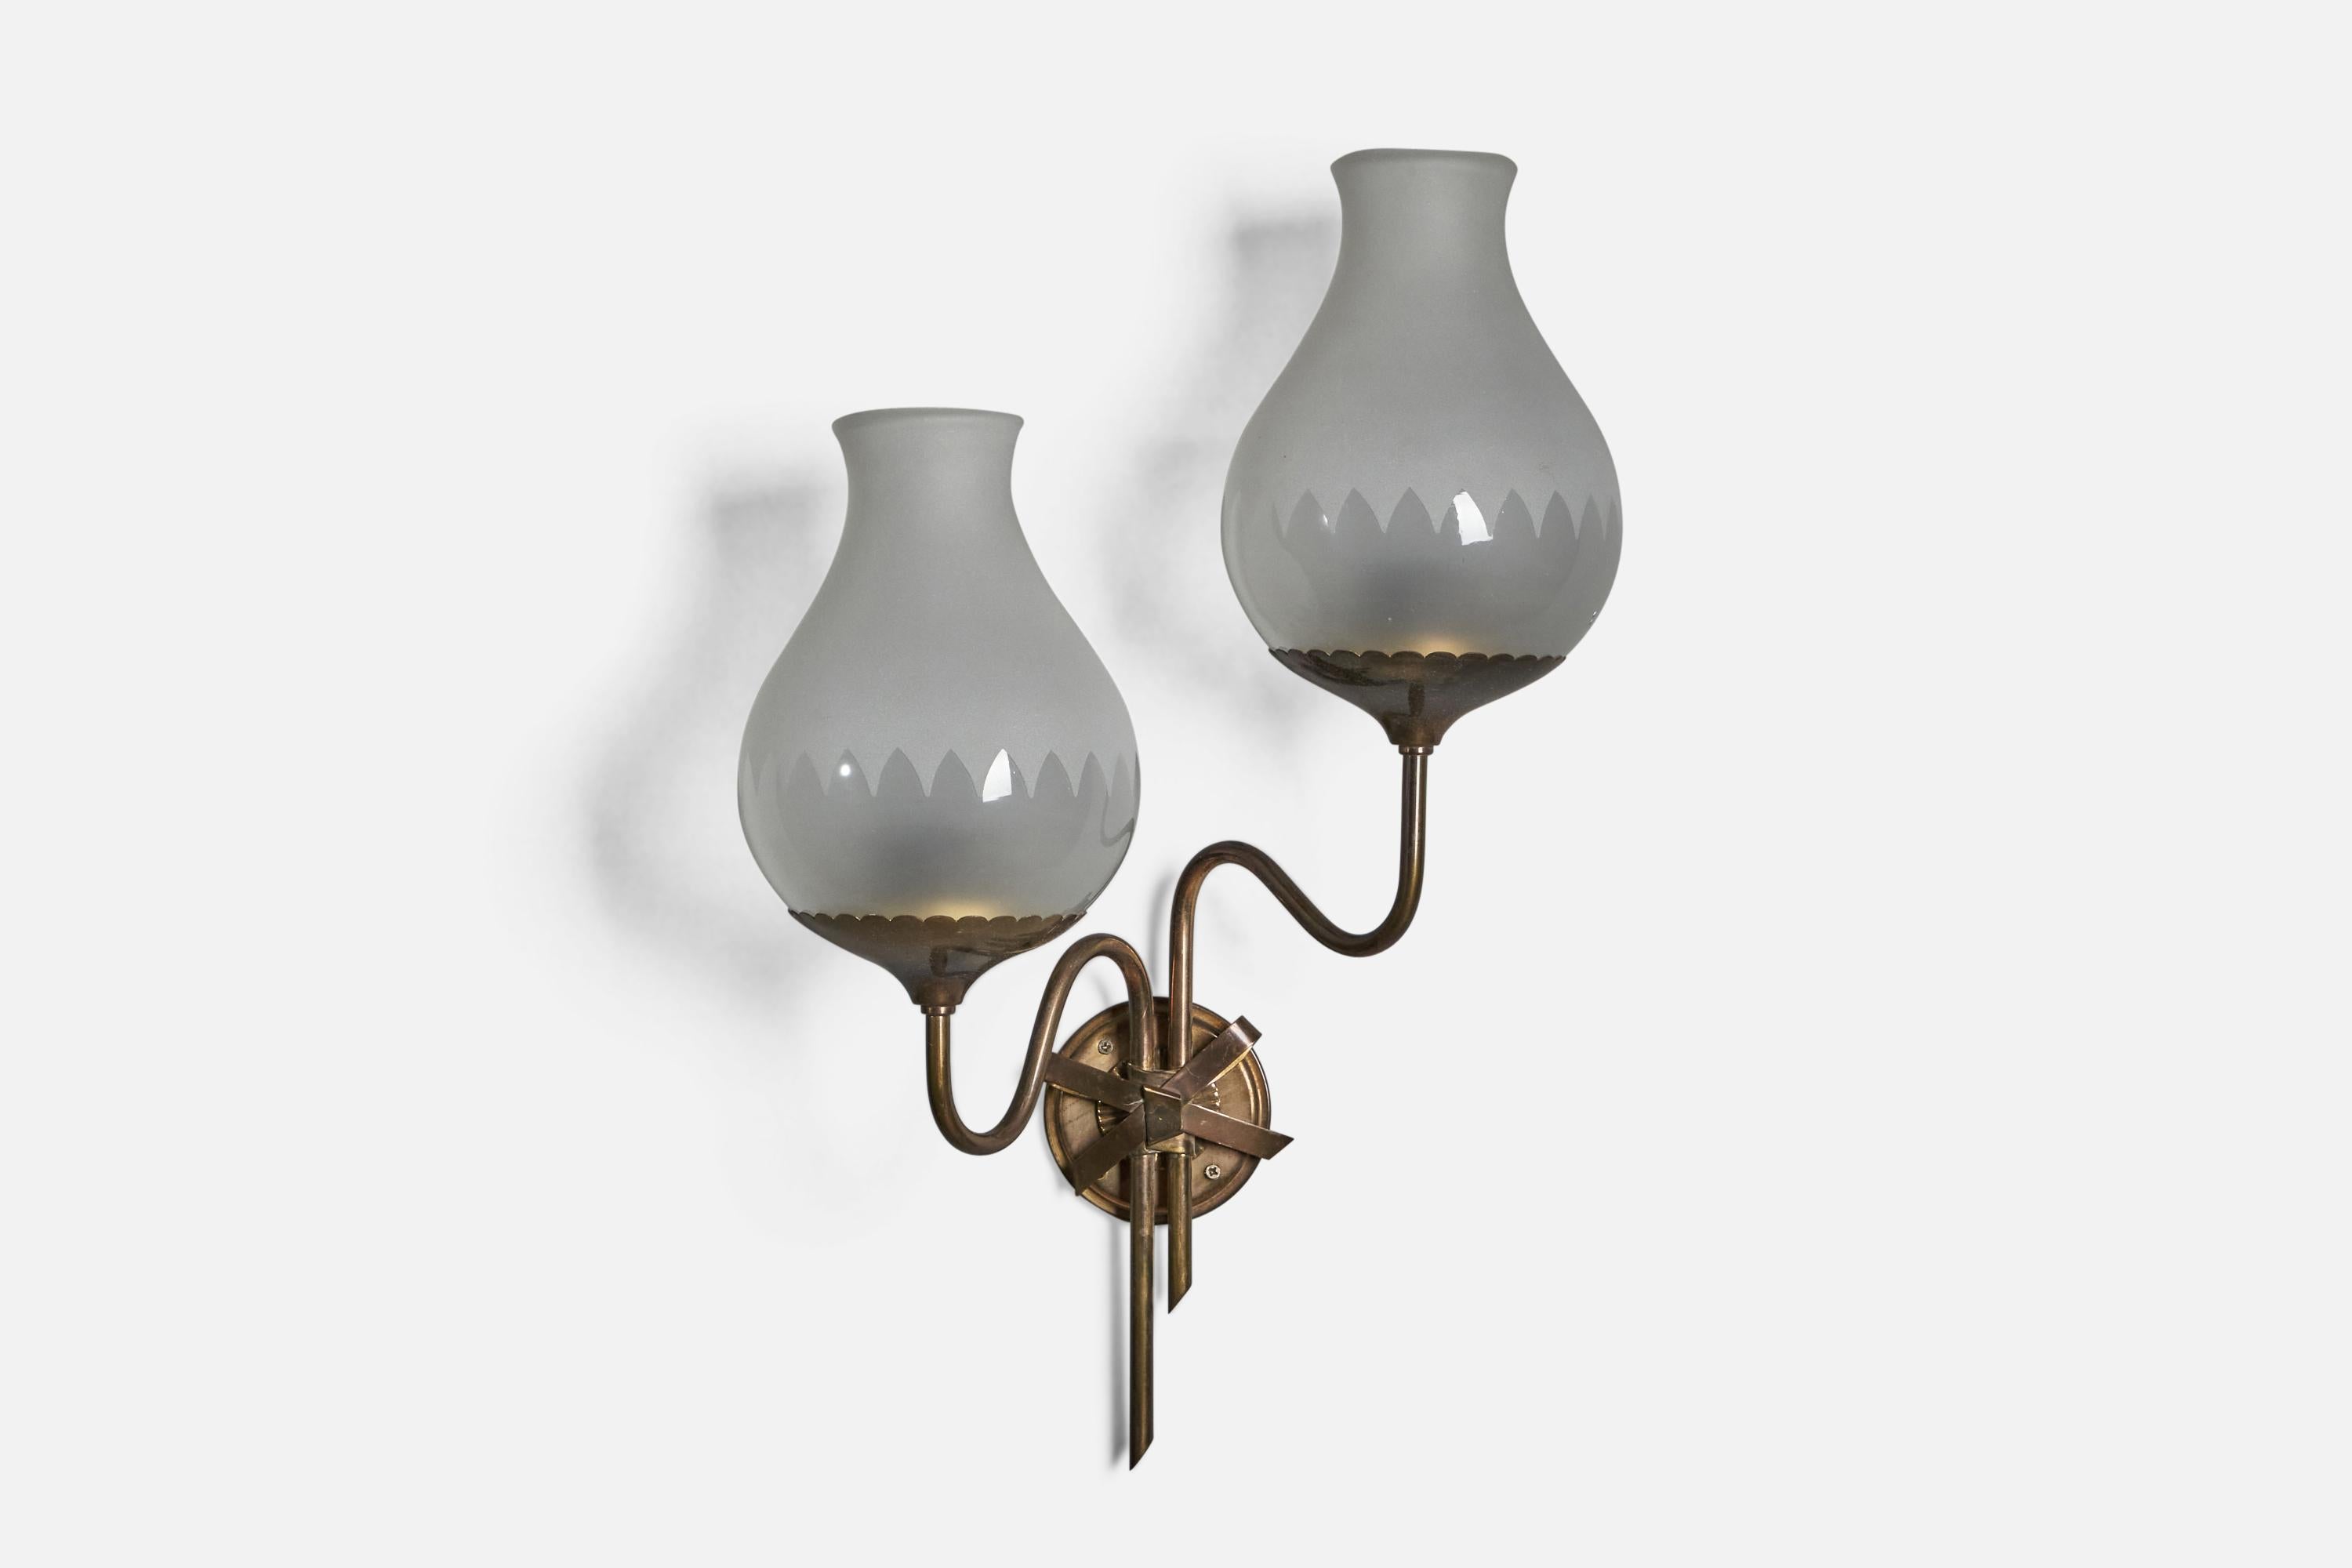 A two-armed brass and semi-frosted glass wall light designed and produced in Sweden, 1940s.

Overall Dimensions (inches): 21” H x 14” W x 8” D
Back Plate Dimensions (inches): 3.75” Diameter
Bulb Specifications: E-26 Bulb
Number of Sockets: 2